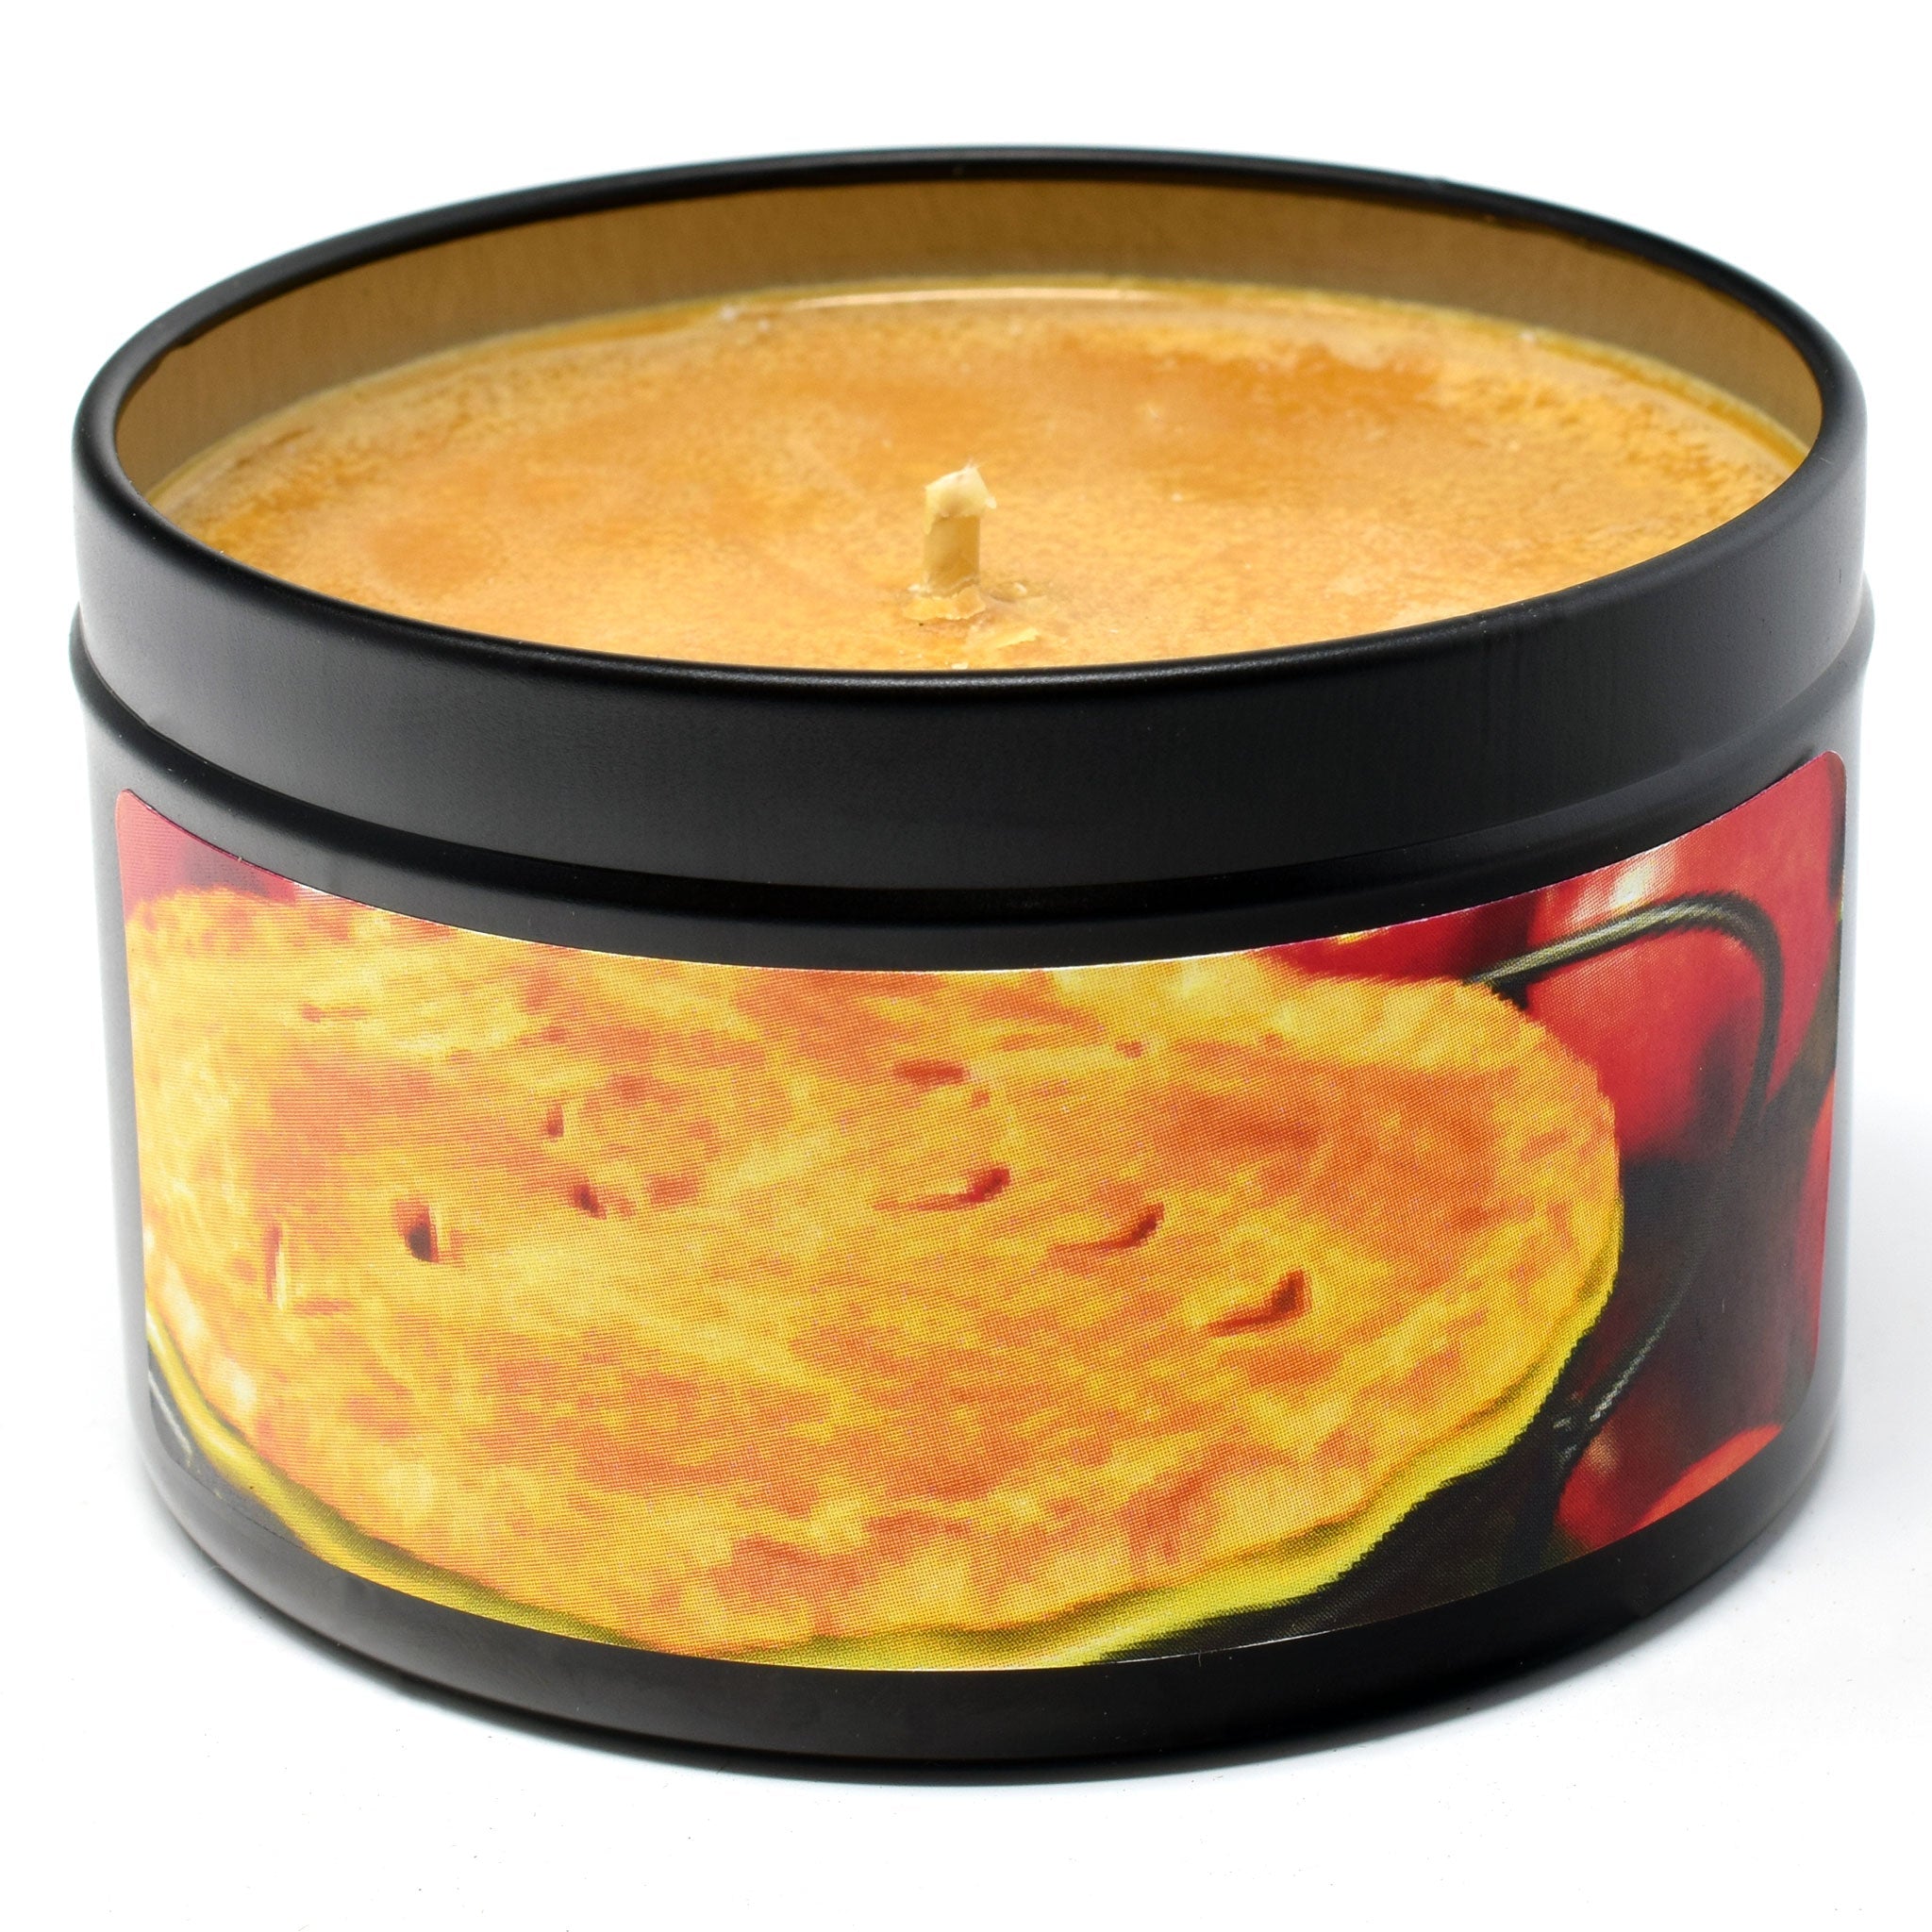 Homemade Apple Pie, 6oz Soy Candle Tin - Candeo Candle